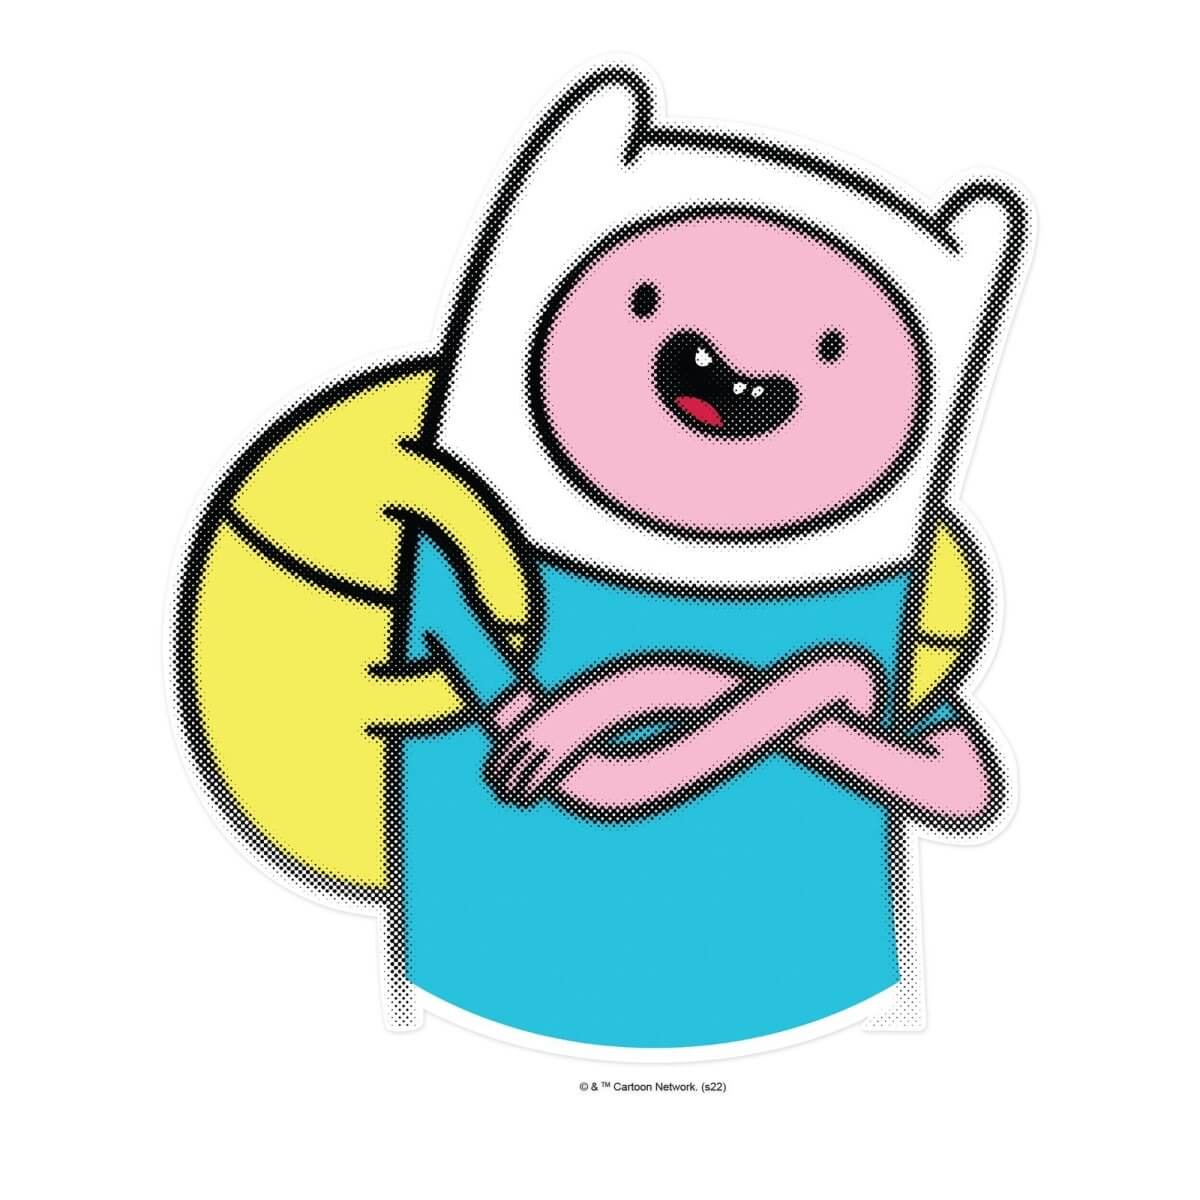 Kismet Decals Adventure Time Finn the Human Licensed Wall Sticker - Easy DIY Home & Kids Room Decor Wall Decal Art - Kismet Decals